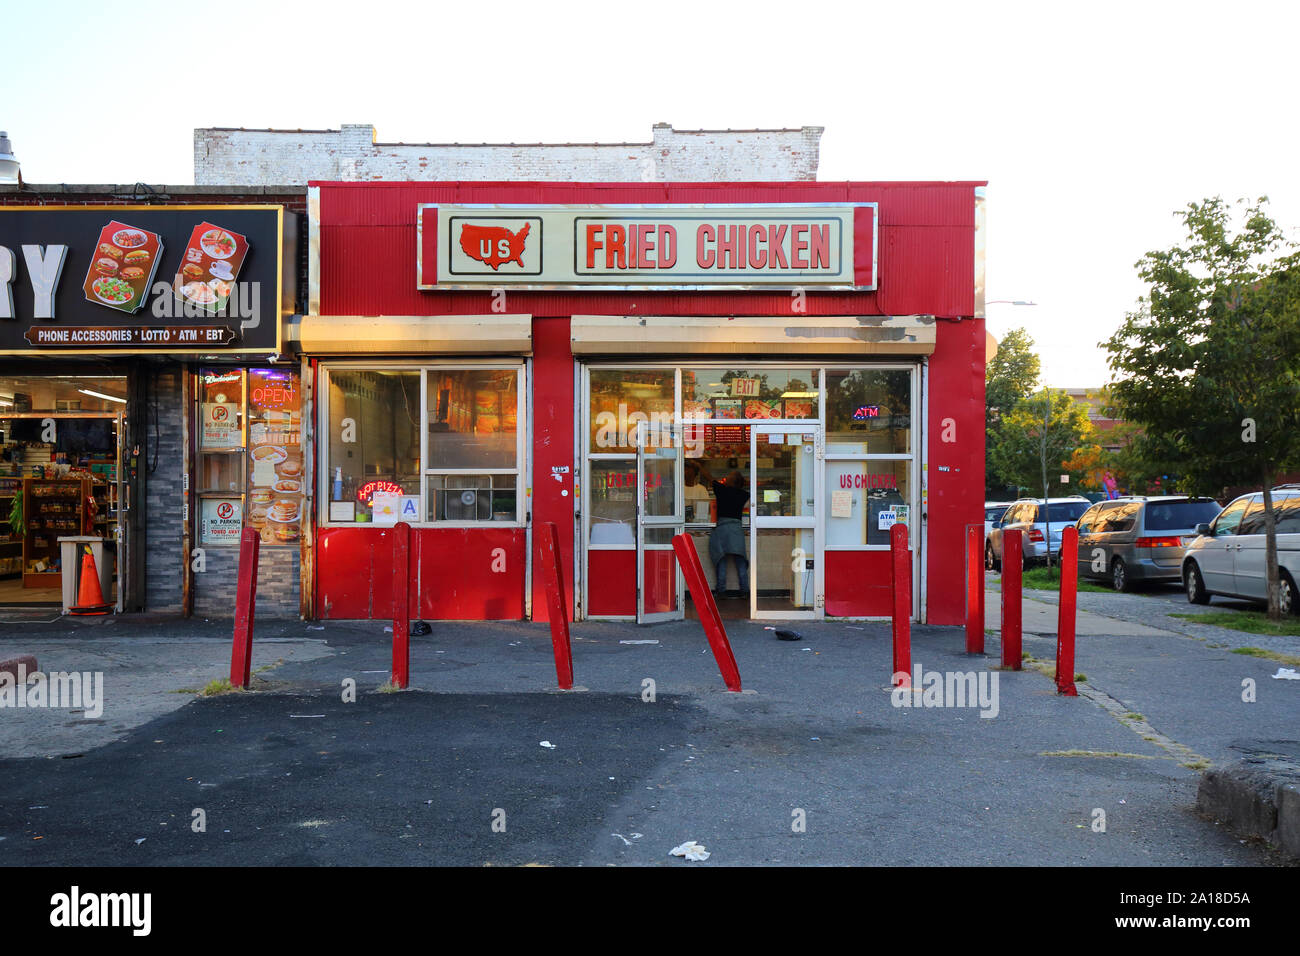 US Fried Chicken, 129 Dwight Street, Brooklyn, New York. NYC storefront photo of an eatery in red hook. Stock Photo